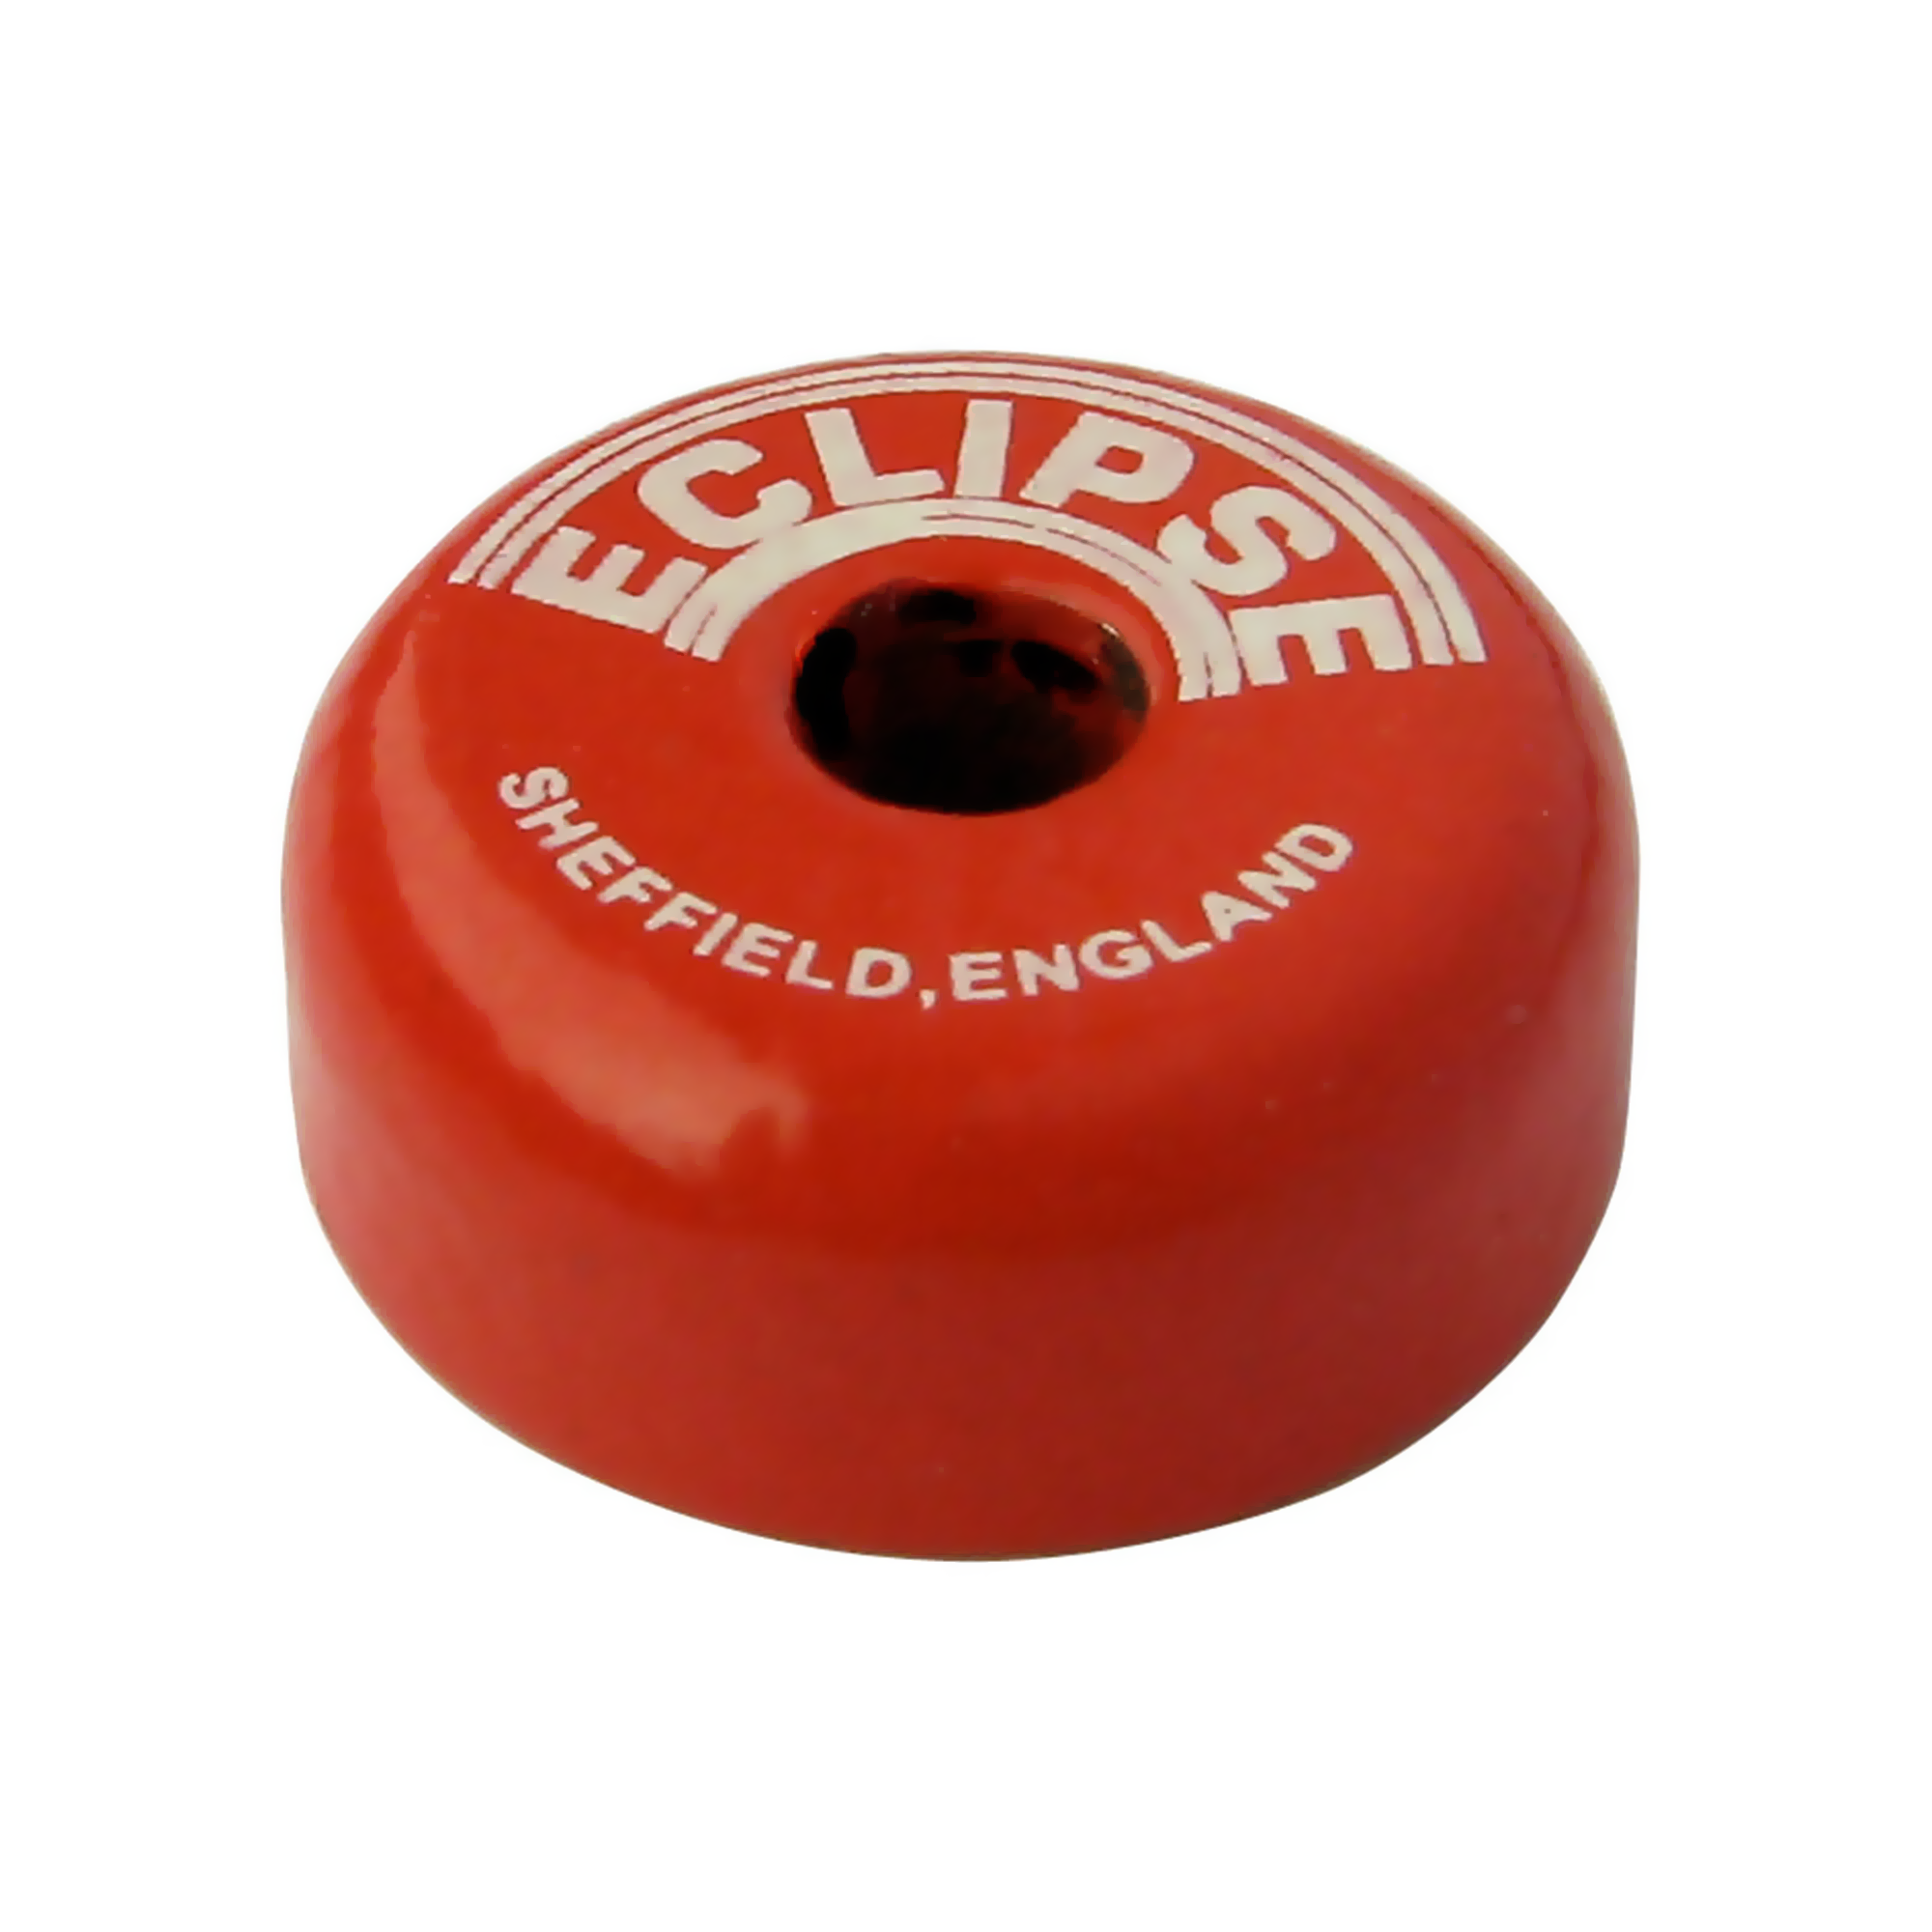 Alnico Shallow Pot Magnet 38.1mm - EC-828-RB by Eclipse